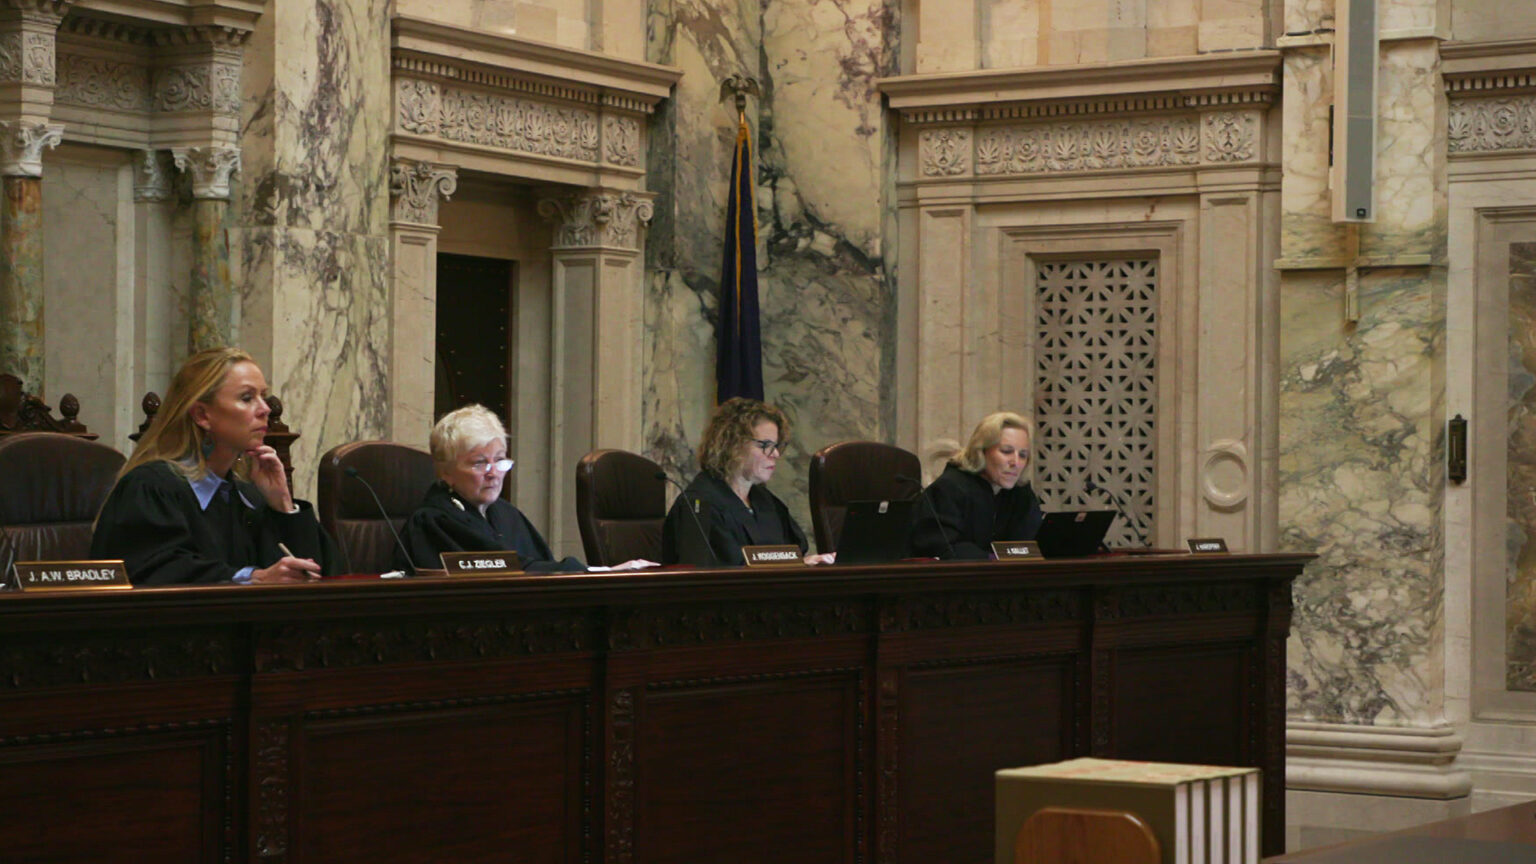 Annette Ziegler sits in her chair at the Wisconsin Supreme Court bench and holds her left hand to her face while writing with her right hand, with then-Justice Patience Roggensack along with justices Rebecca Dallet and Jill Karofsky seated to the side, in a room with marble pillars, lintels and other masonry.